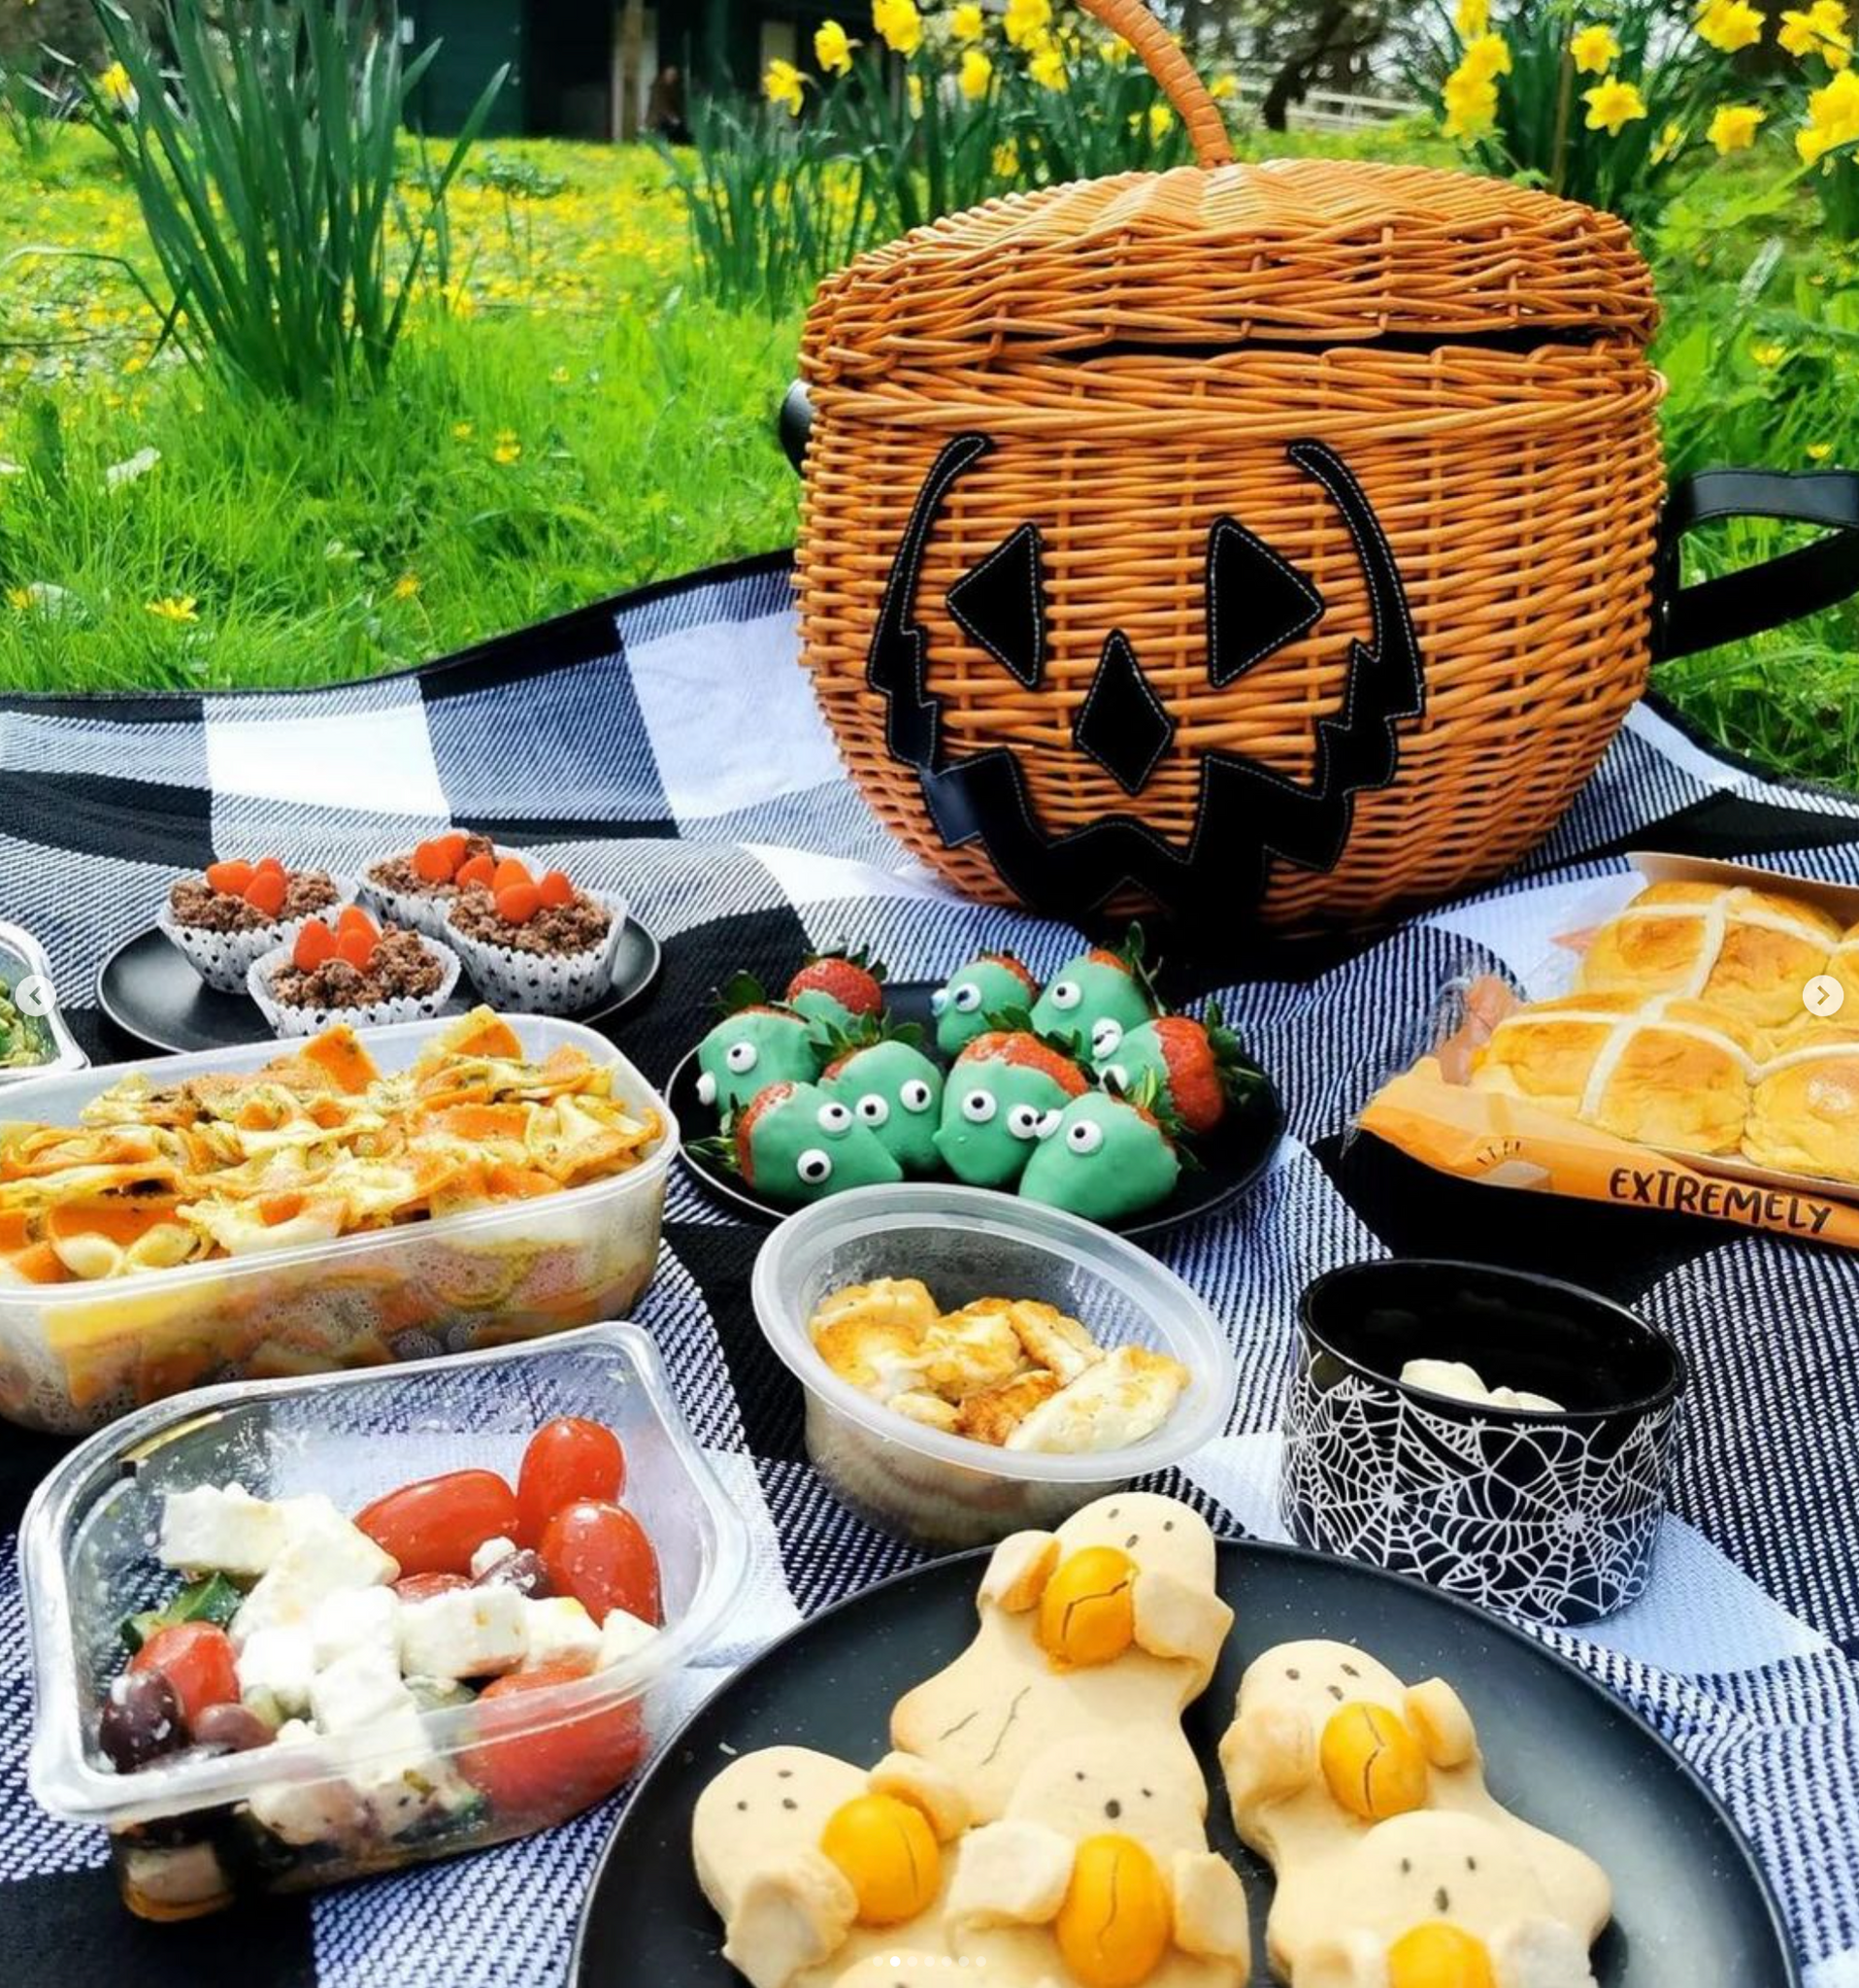 Easter-ween easter ween easter halloween themed picnic with spooky strawberries, salads and a jack-o-lantern pumpkin shaped wicker basket on grass.